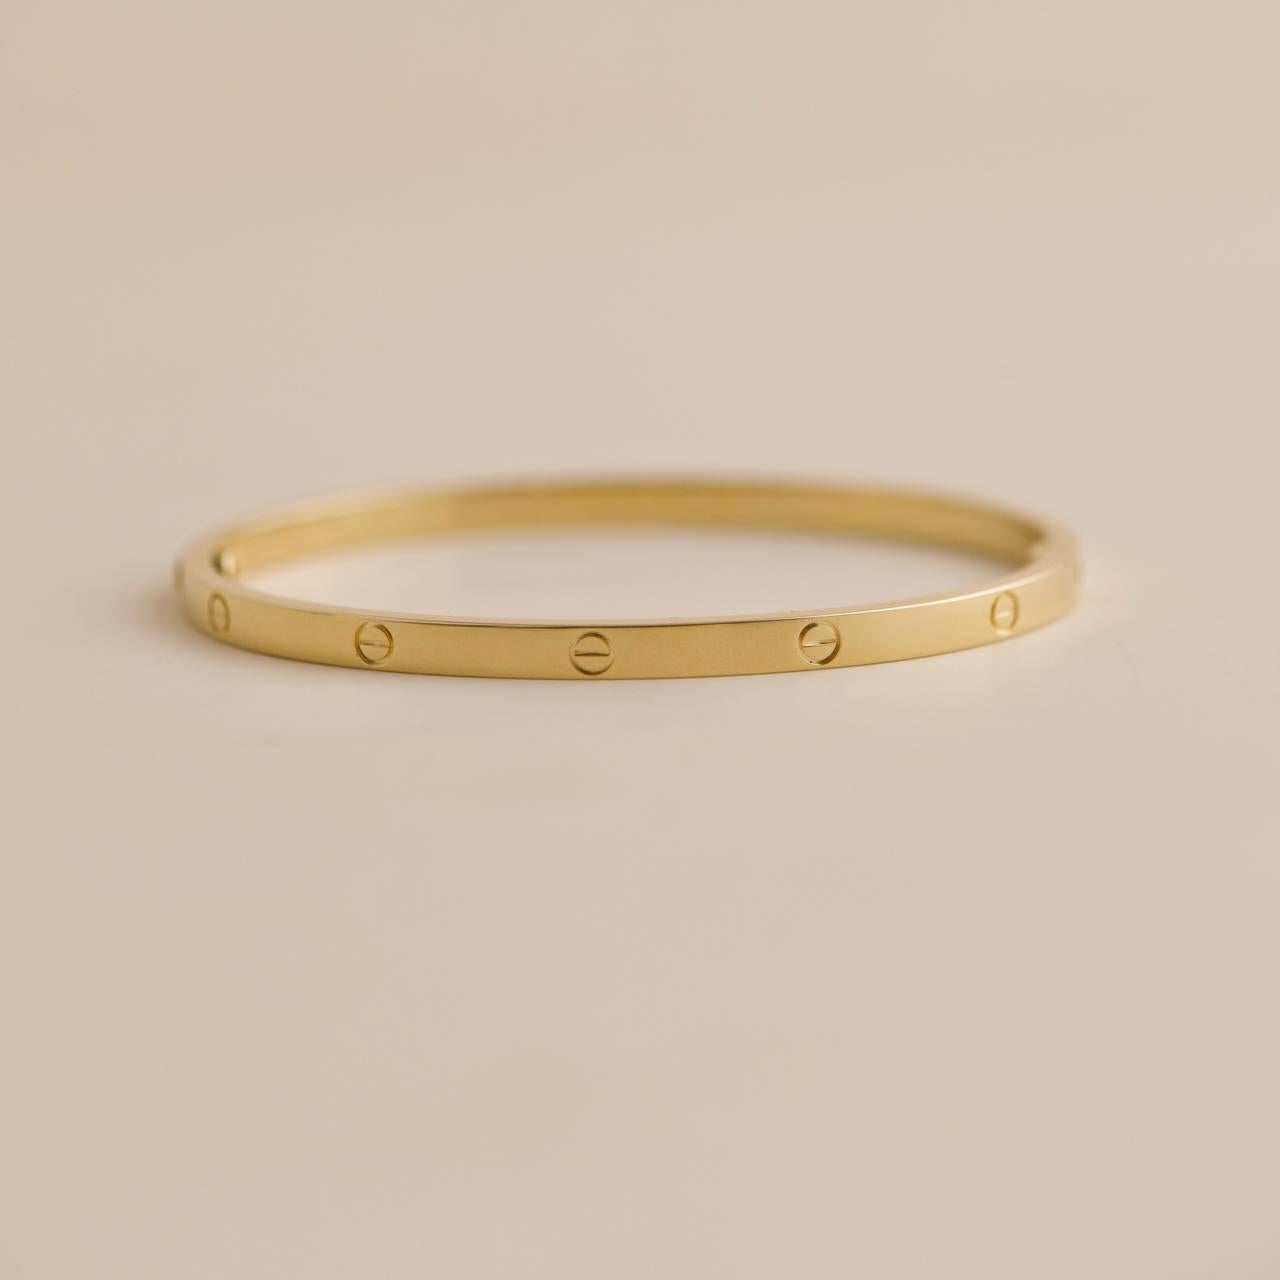 Cartier Love Bracelet Small Model 18K Yellow Gold Size 18 In Excellent Condition For Sale In Banbury, GB